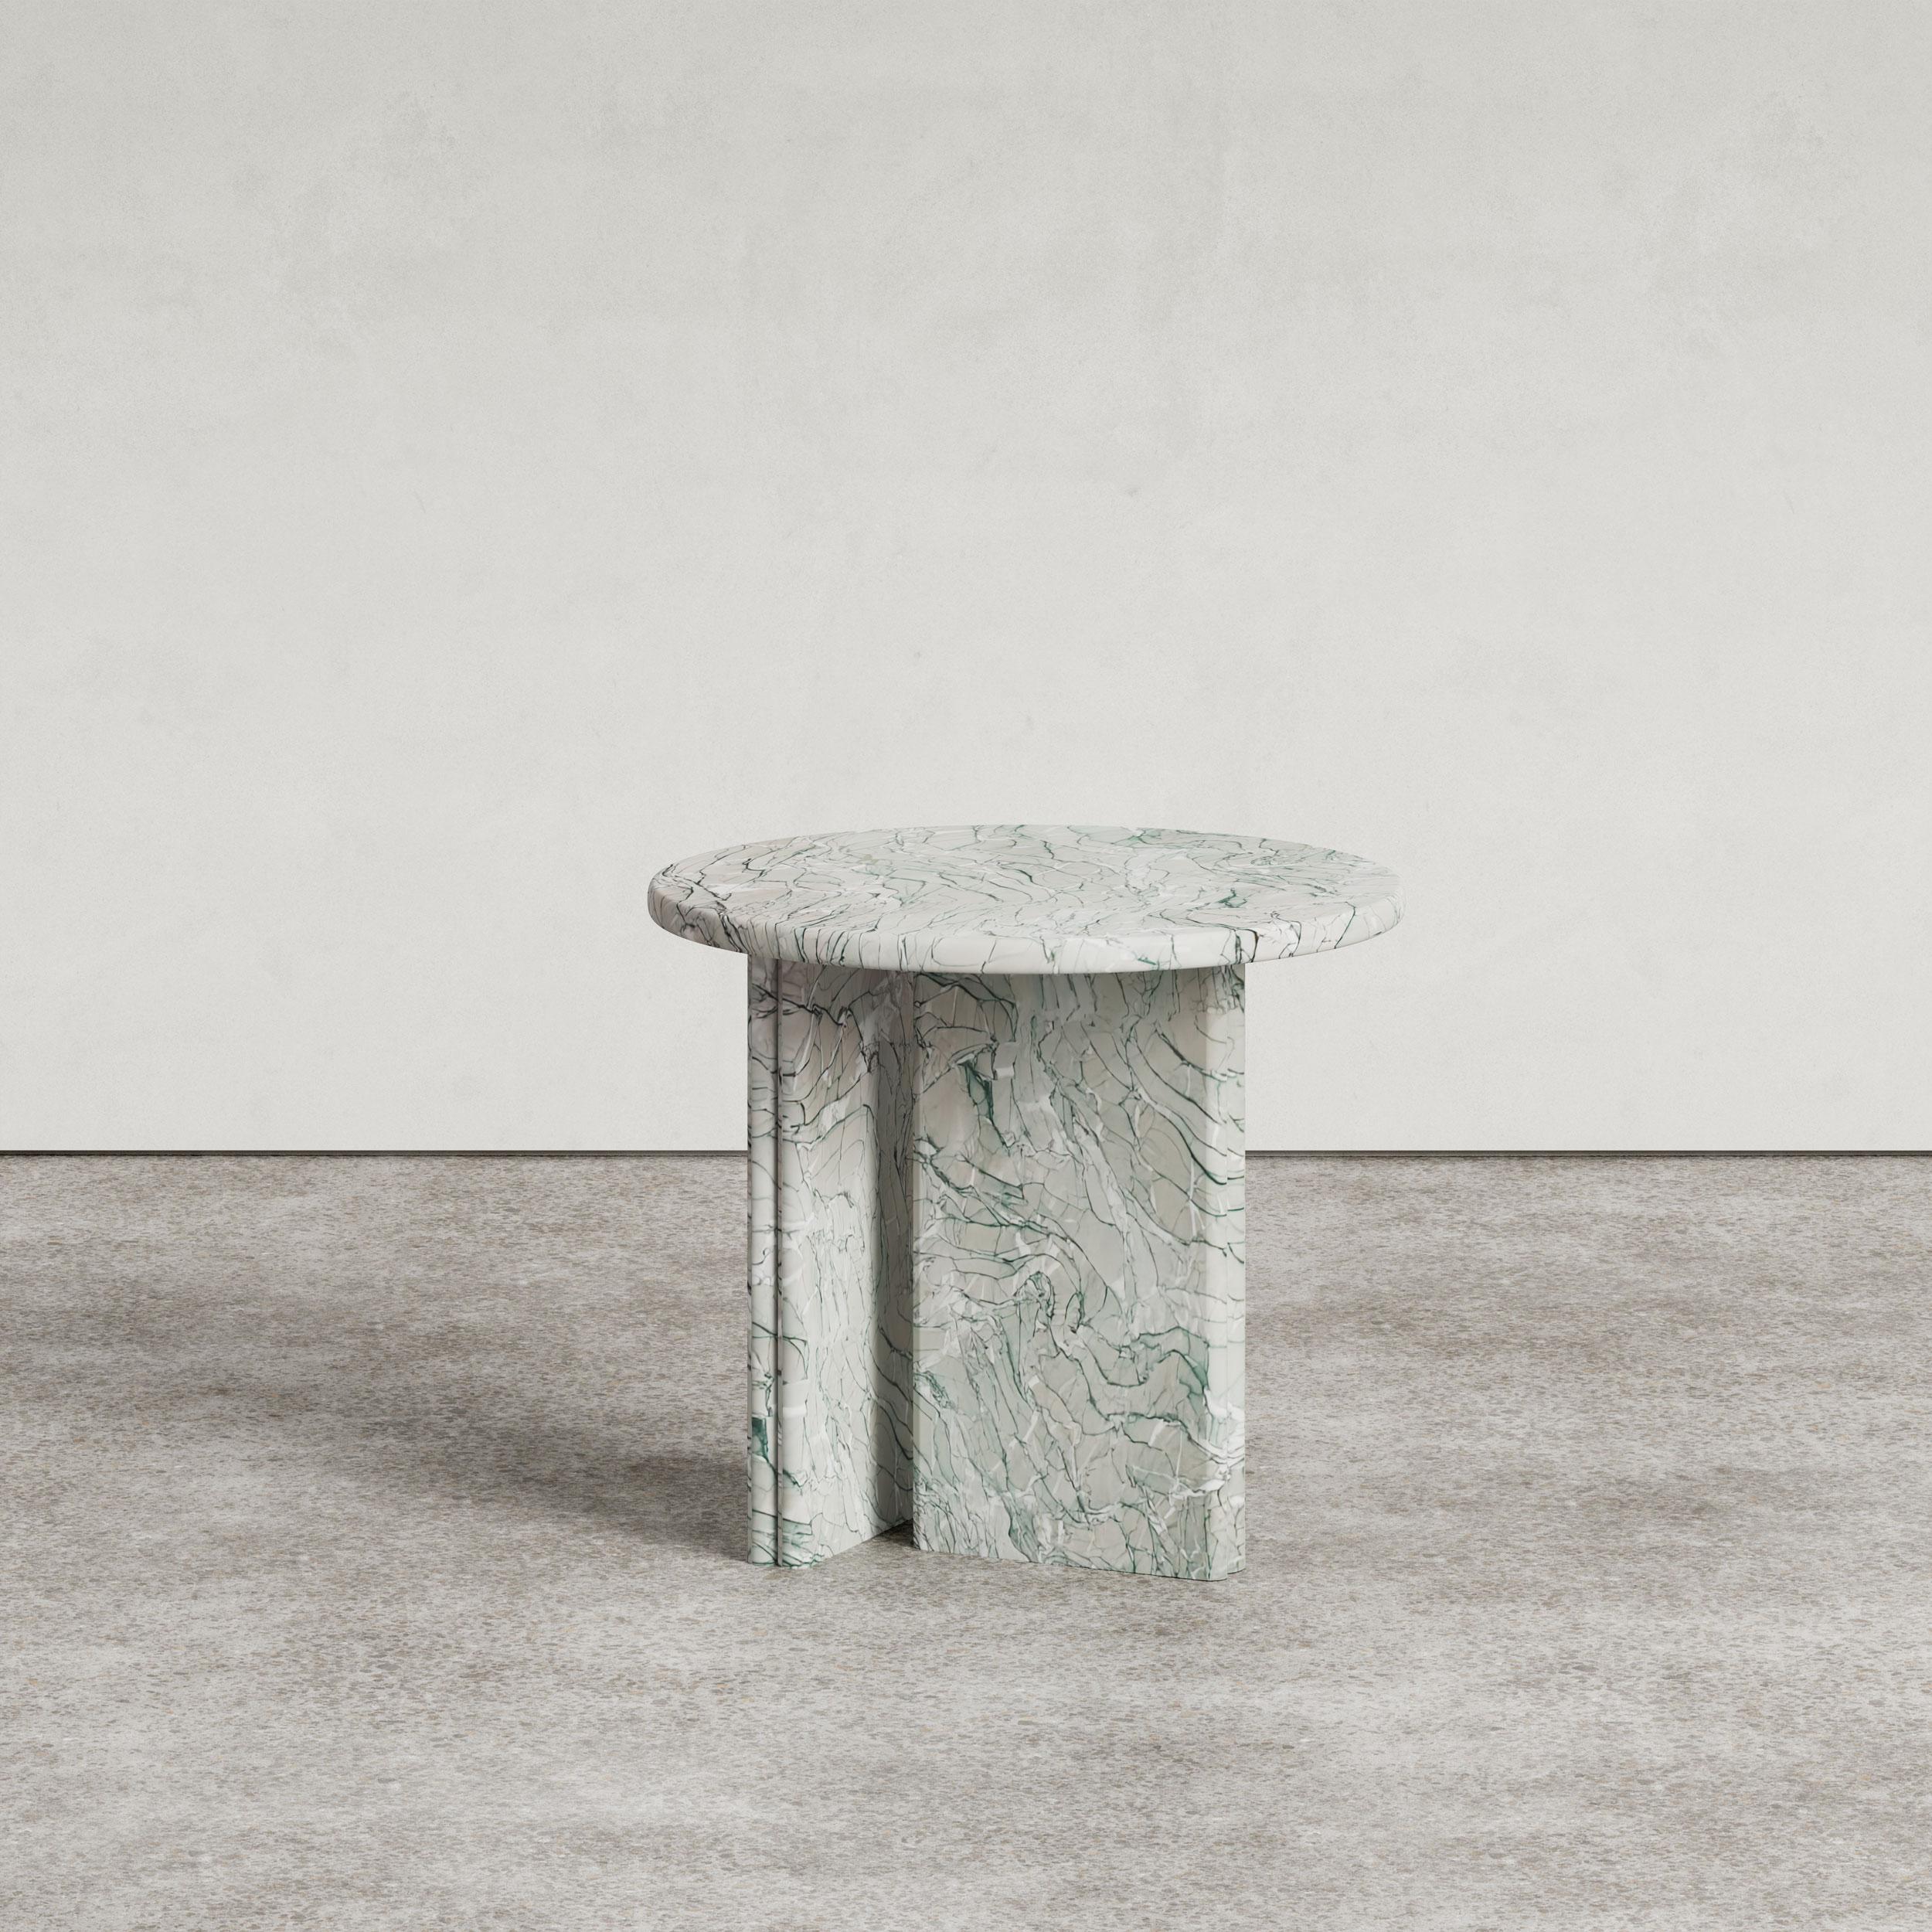 Onda Side Table in Verde Bianco designed by Just Adele. Made to order just for you locally in Melbourne. 

The Onda Side Table is characterised by its soft forms and bold stone finishes. Translating to “wave” in Italian, the name Onda takes its cue